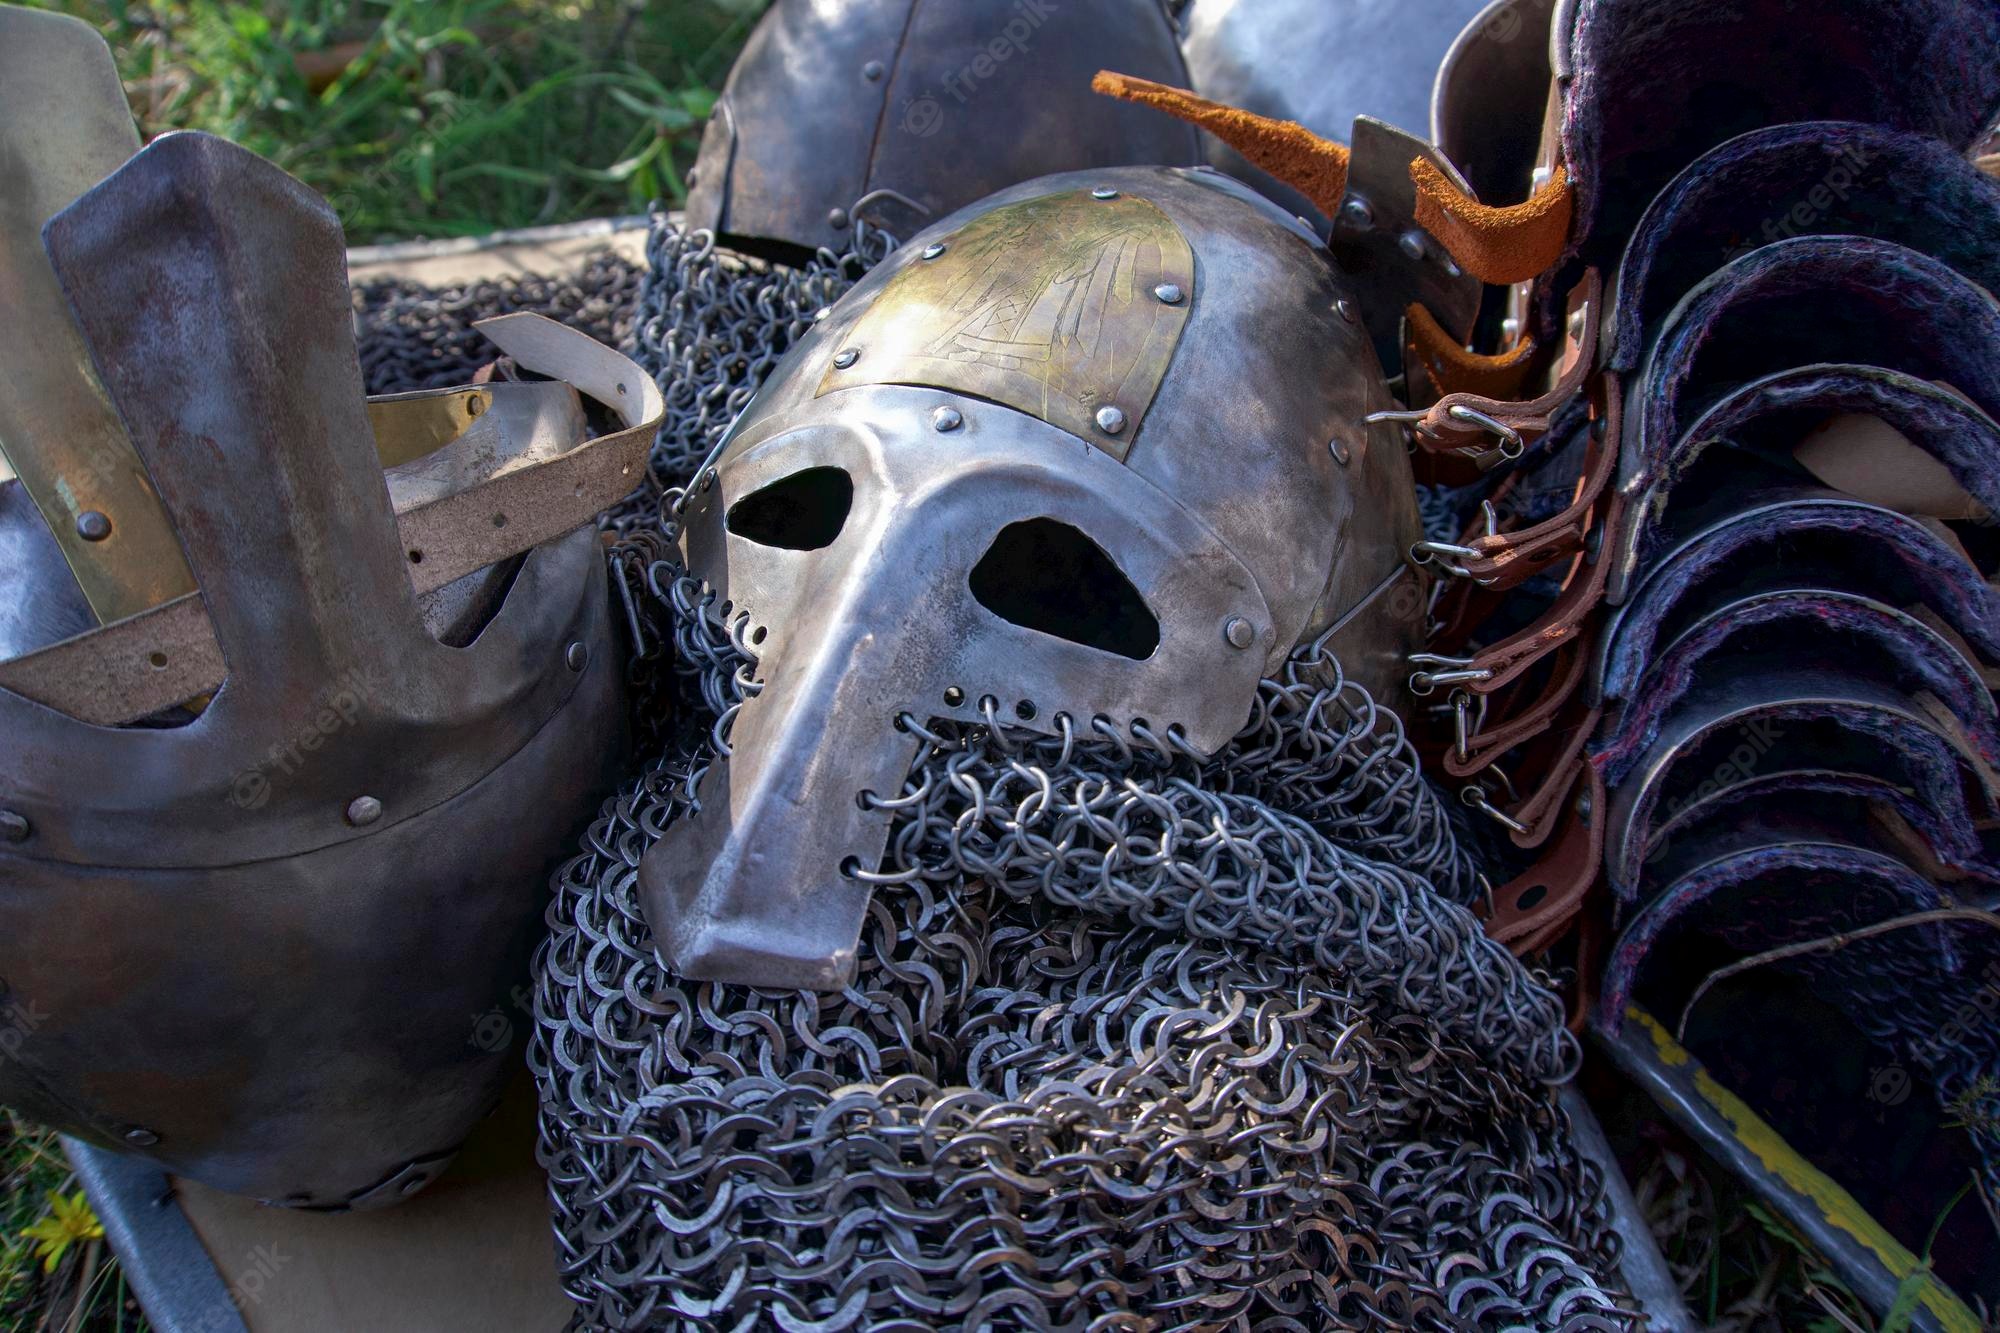 Iron armor helmet, chain mail suit, and belts placed on grass